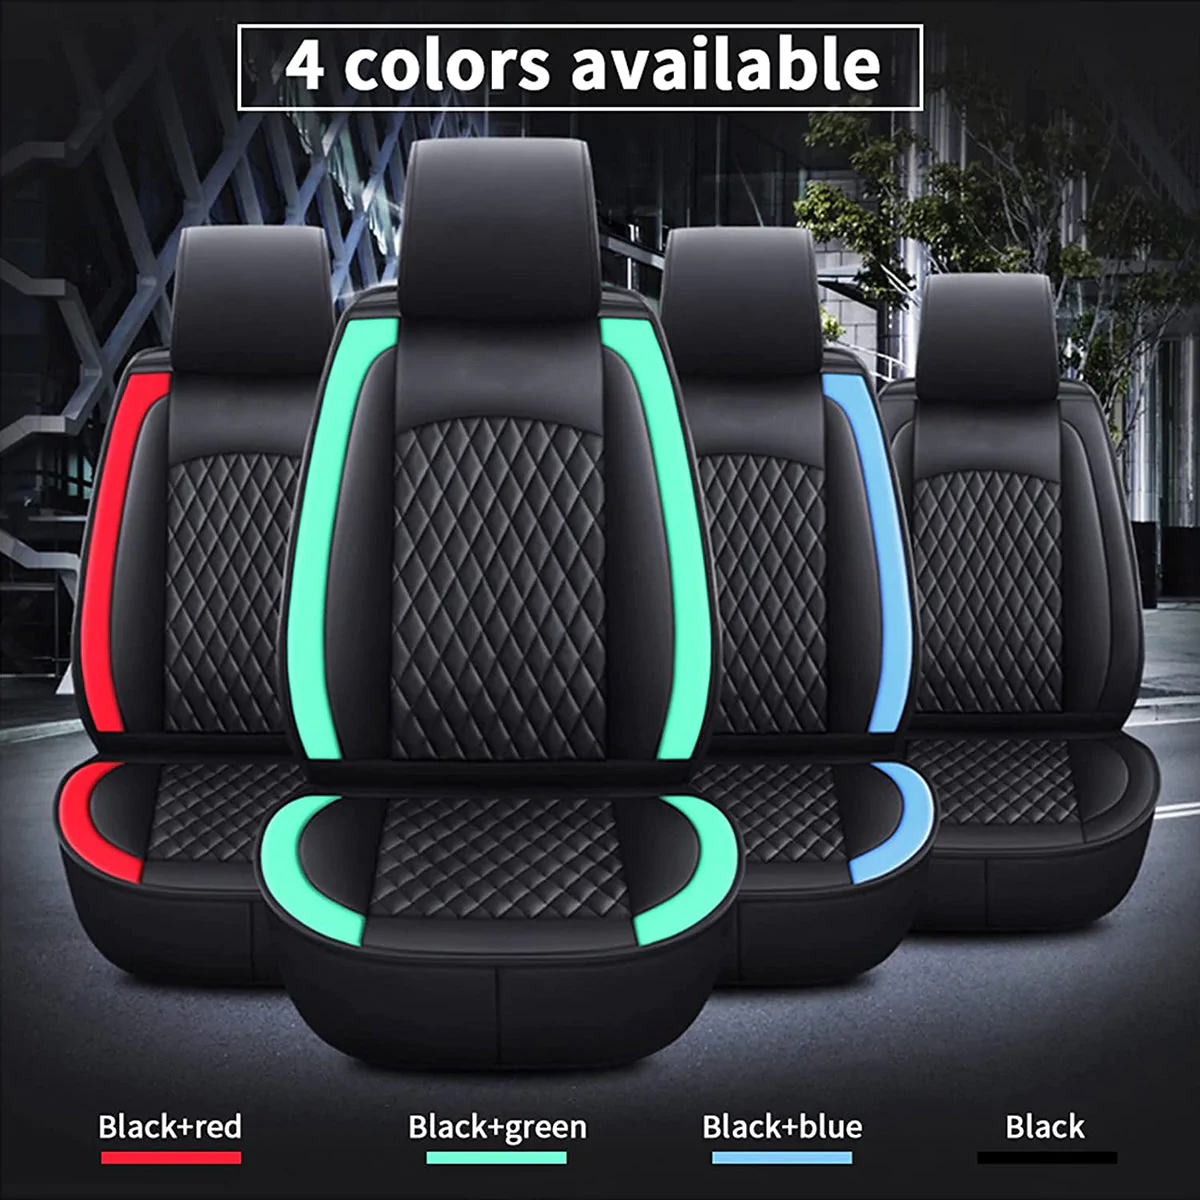 Custom Text For Seat Covers 5 Seats Full Set, Custom Fit For Your Cars, Leatherette Automotive Seat Cushion Protector Universal Fit, Vehicle Auto Interior Decor CC13988